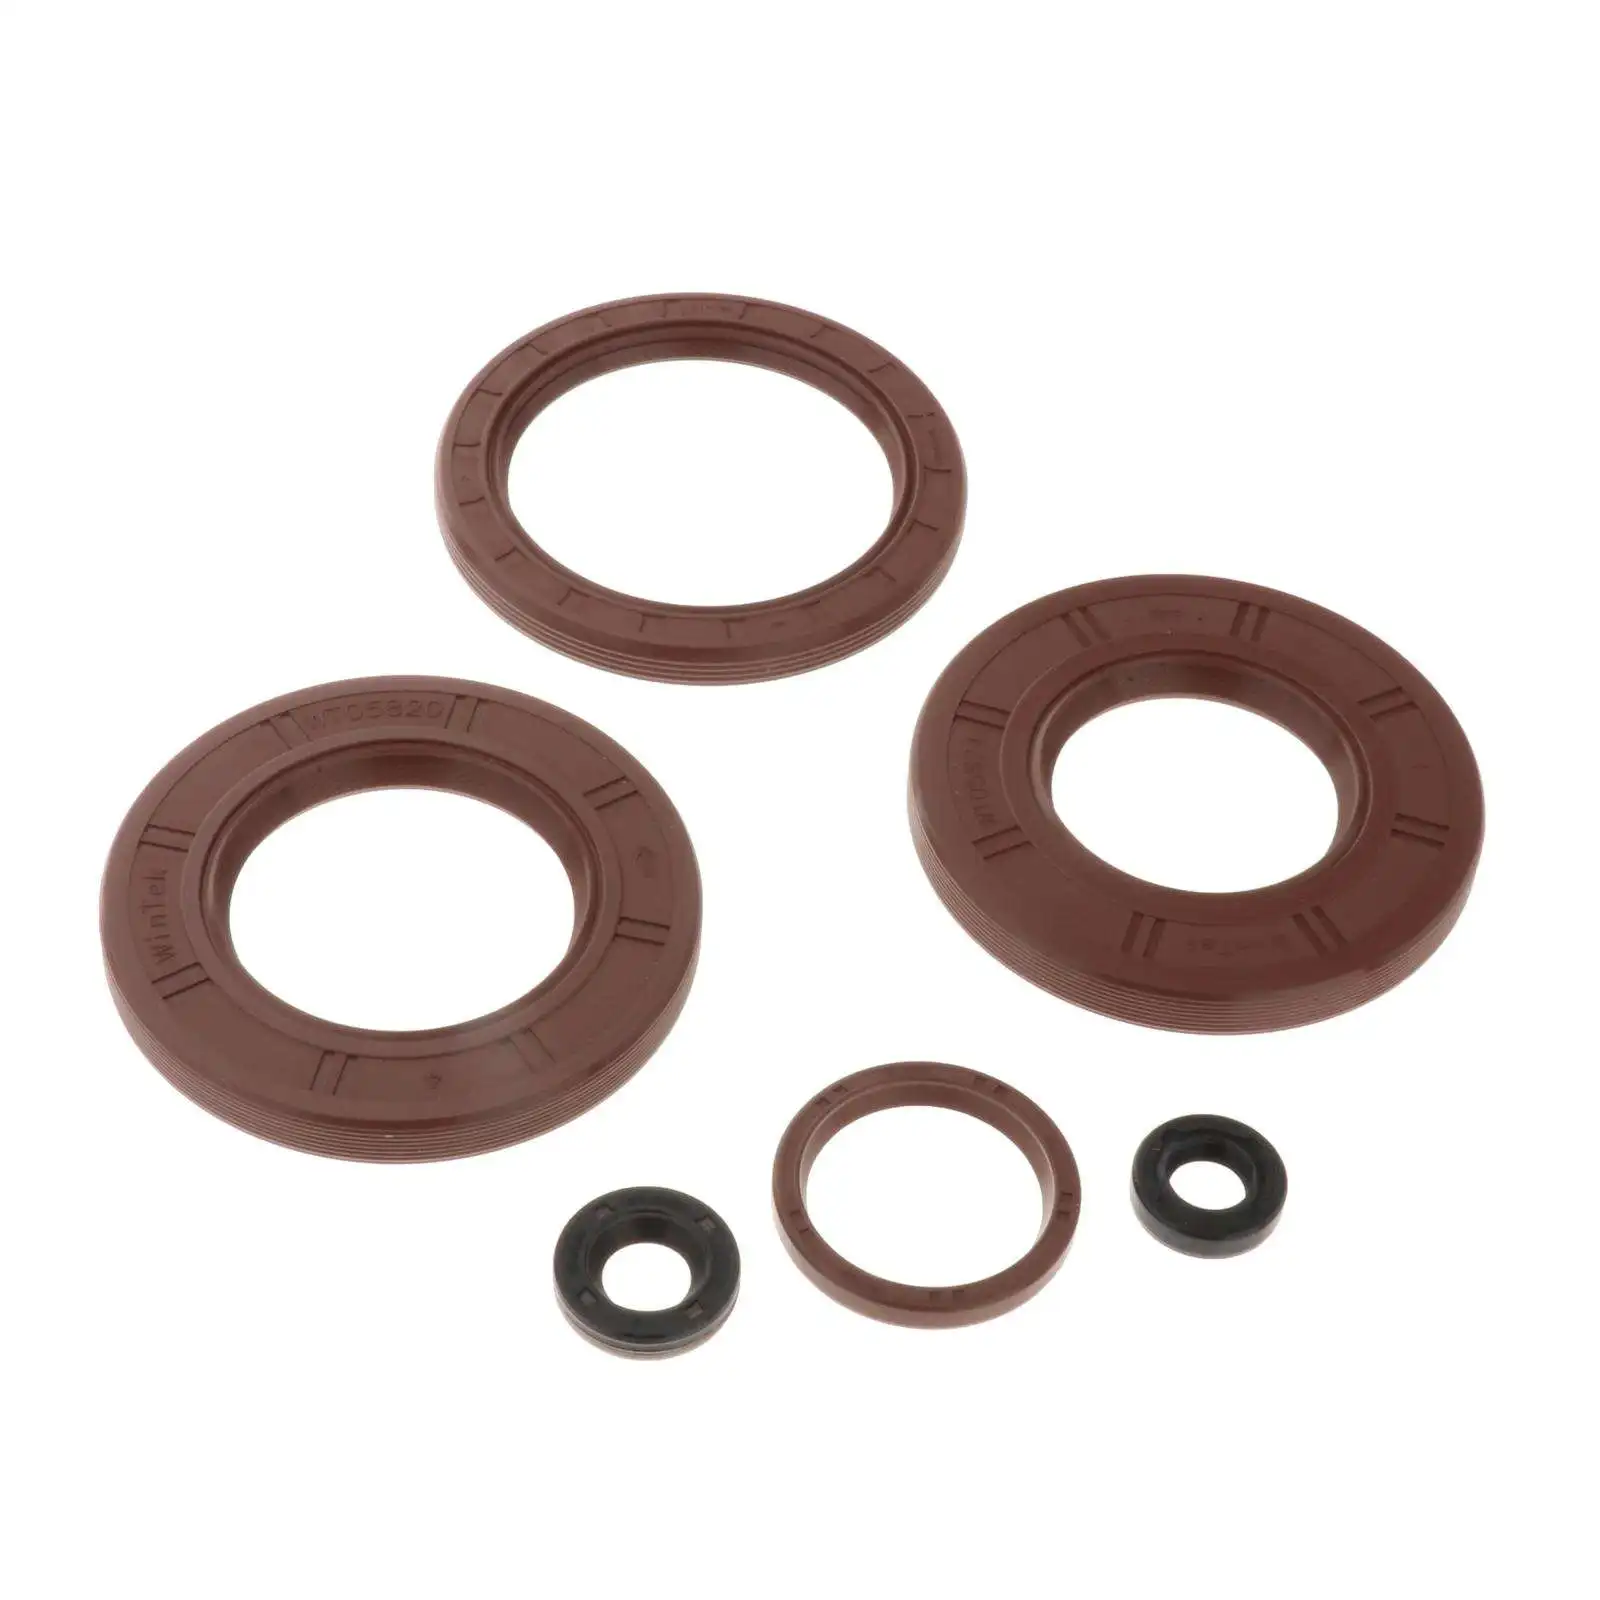 8HP45 - Transmission Oil Seal Package Oil Seal Set ZF8Speed for  X1 X3 X5 8HP45 319080AK for Land Rover Auto Parts